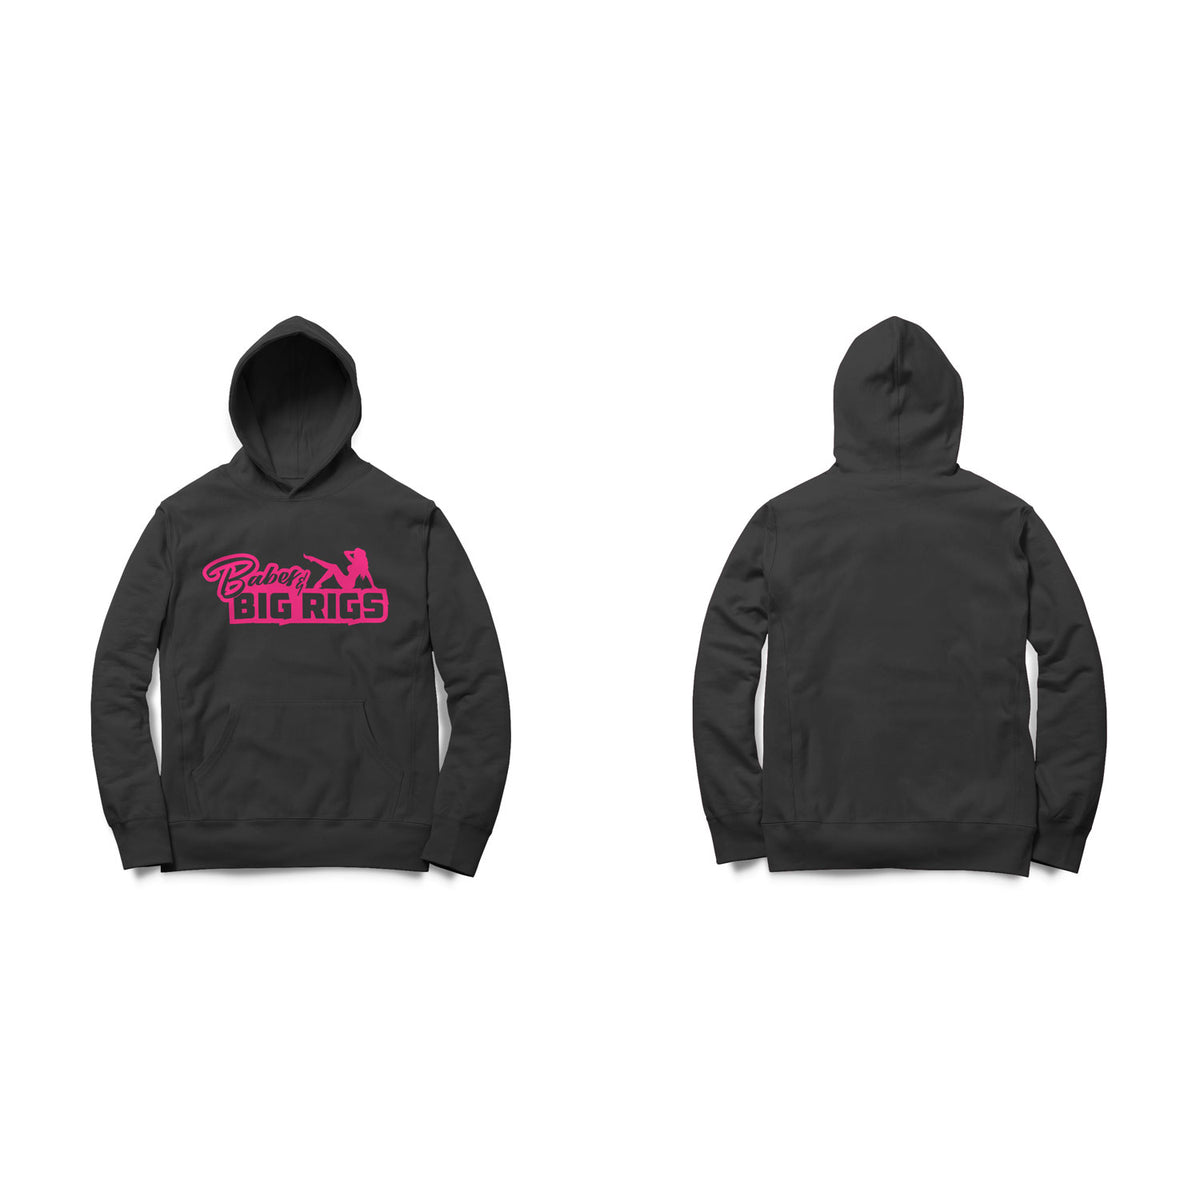 Babes and Big Rigs Pink Logo Shirts and Hoodies